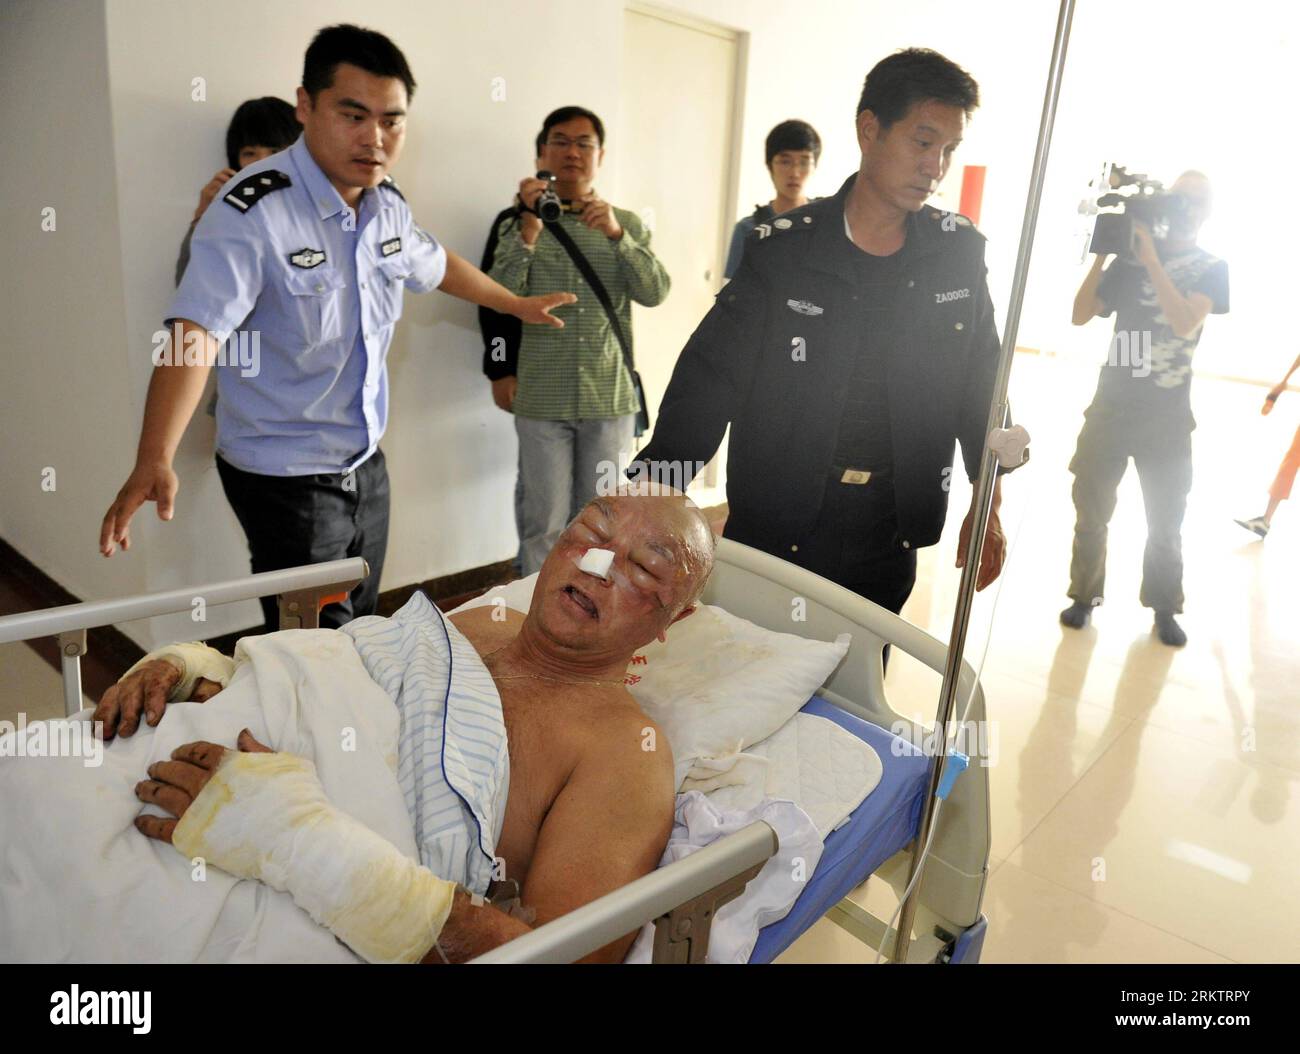 Bildnummer: 58540110  Datum: 01.10.2012  Copyright: imago/Xinhua (121001) -- TIANJIN, Oct. 1, 2012 (Xinhua) -- An injured German national receives medical treatment at the People s Hospital in Tianjin s Wuqing District after a road accident which claimed 6 lives on a pivotal expressway linking Beijing with Shanghai near Beijing, capital of China, Oct. 1, 2012. Six people, including five German nationals and a Chinese, were killed and 14 others, 12 were German, injured after a tourist bus rear-ended a container truck and caught fire on Monday morning on the expressway. None of the injured is li Stock Photo